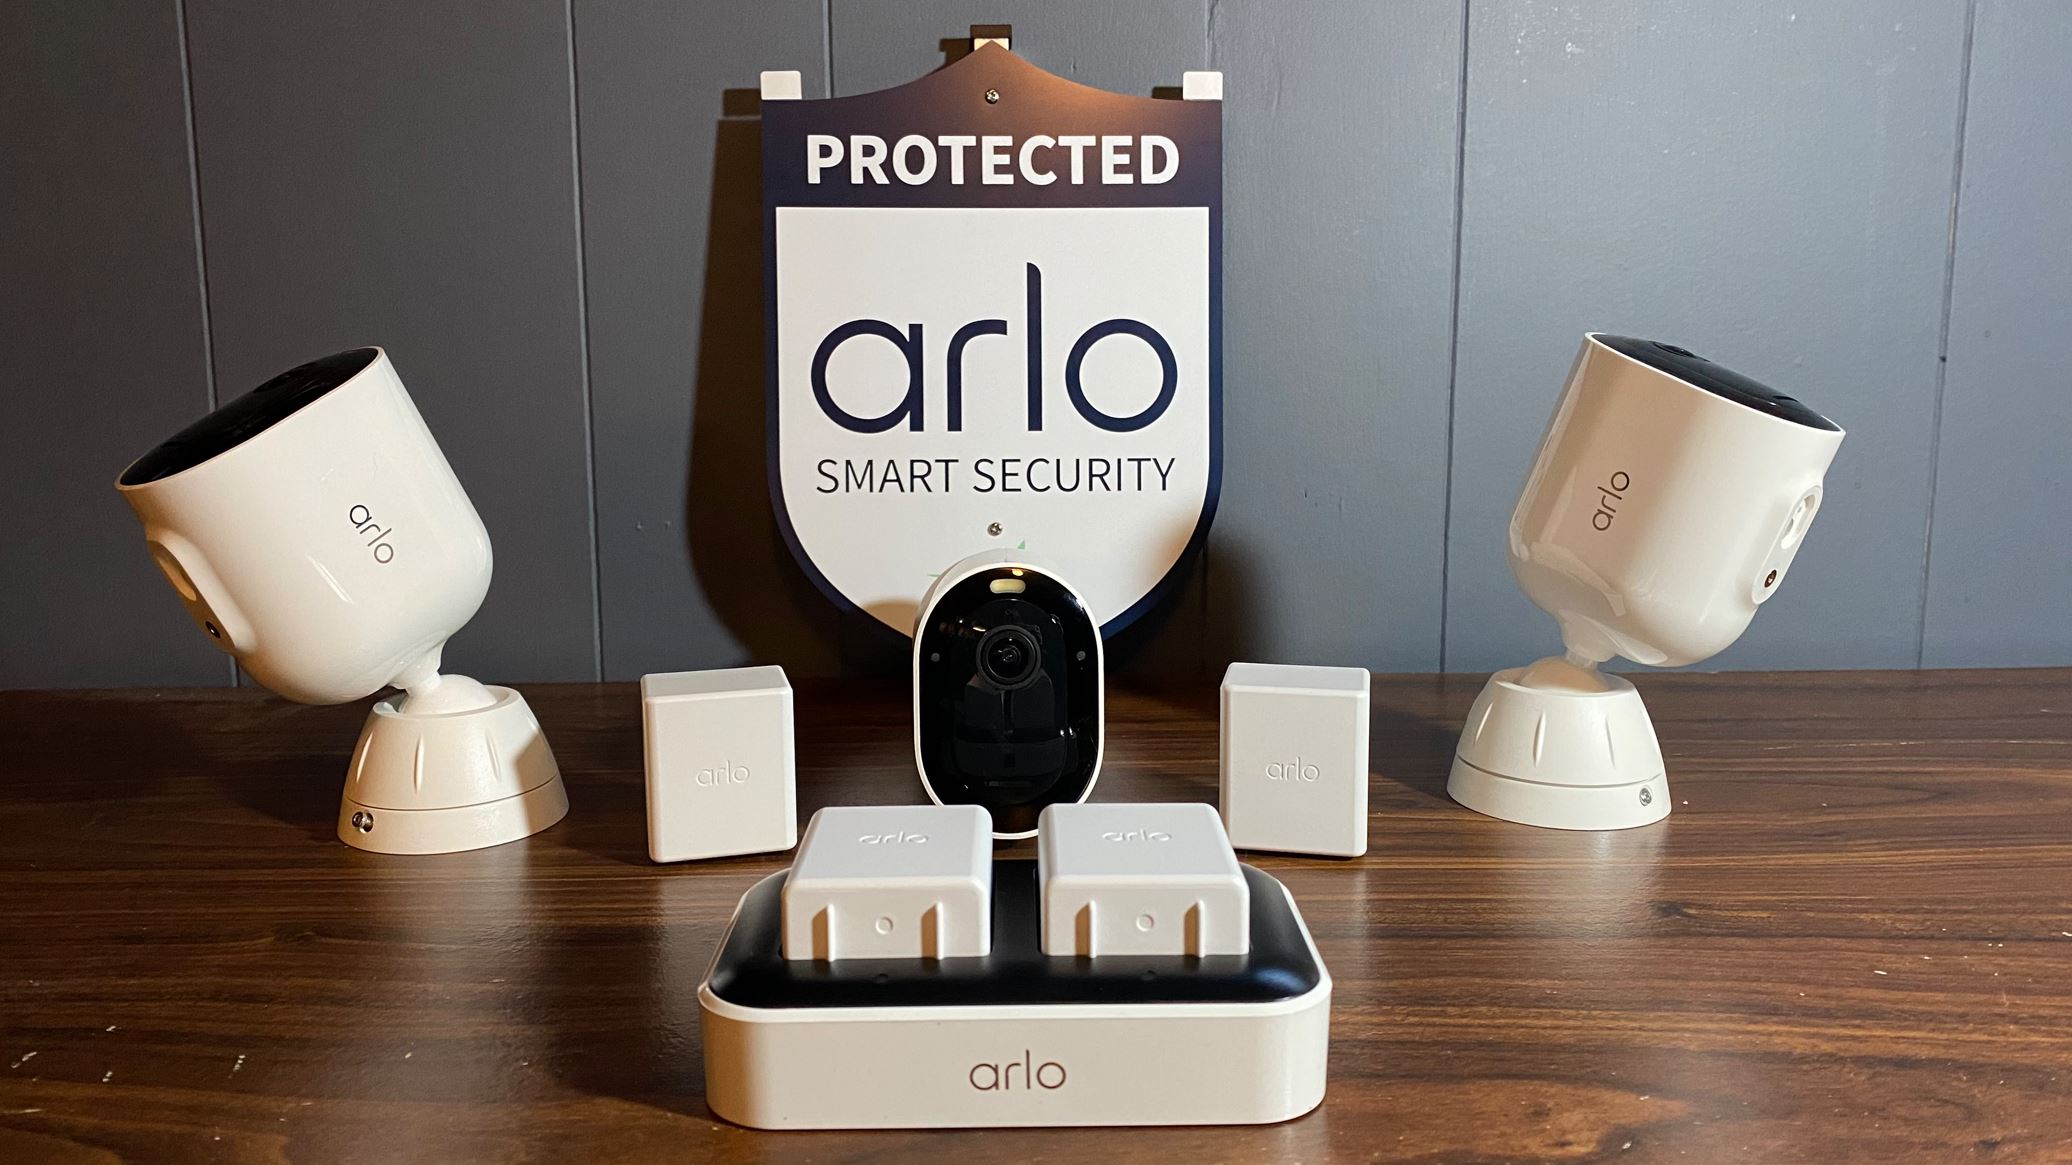 Arlo Pro 5S three camera pack with extra batteries and charger on display in front of the included yard sign